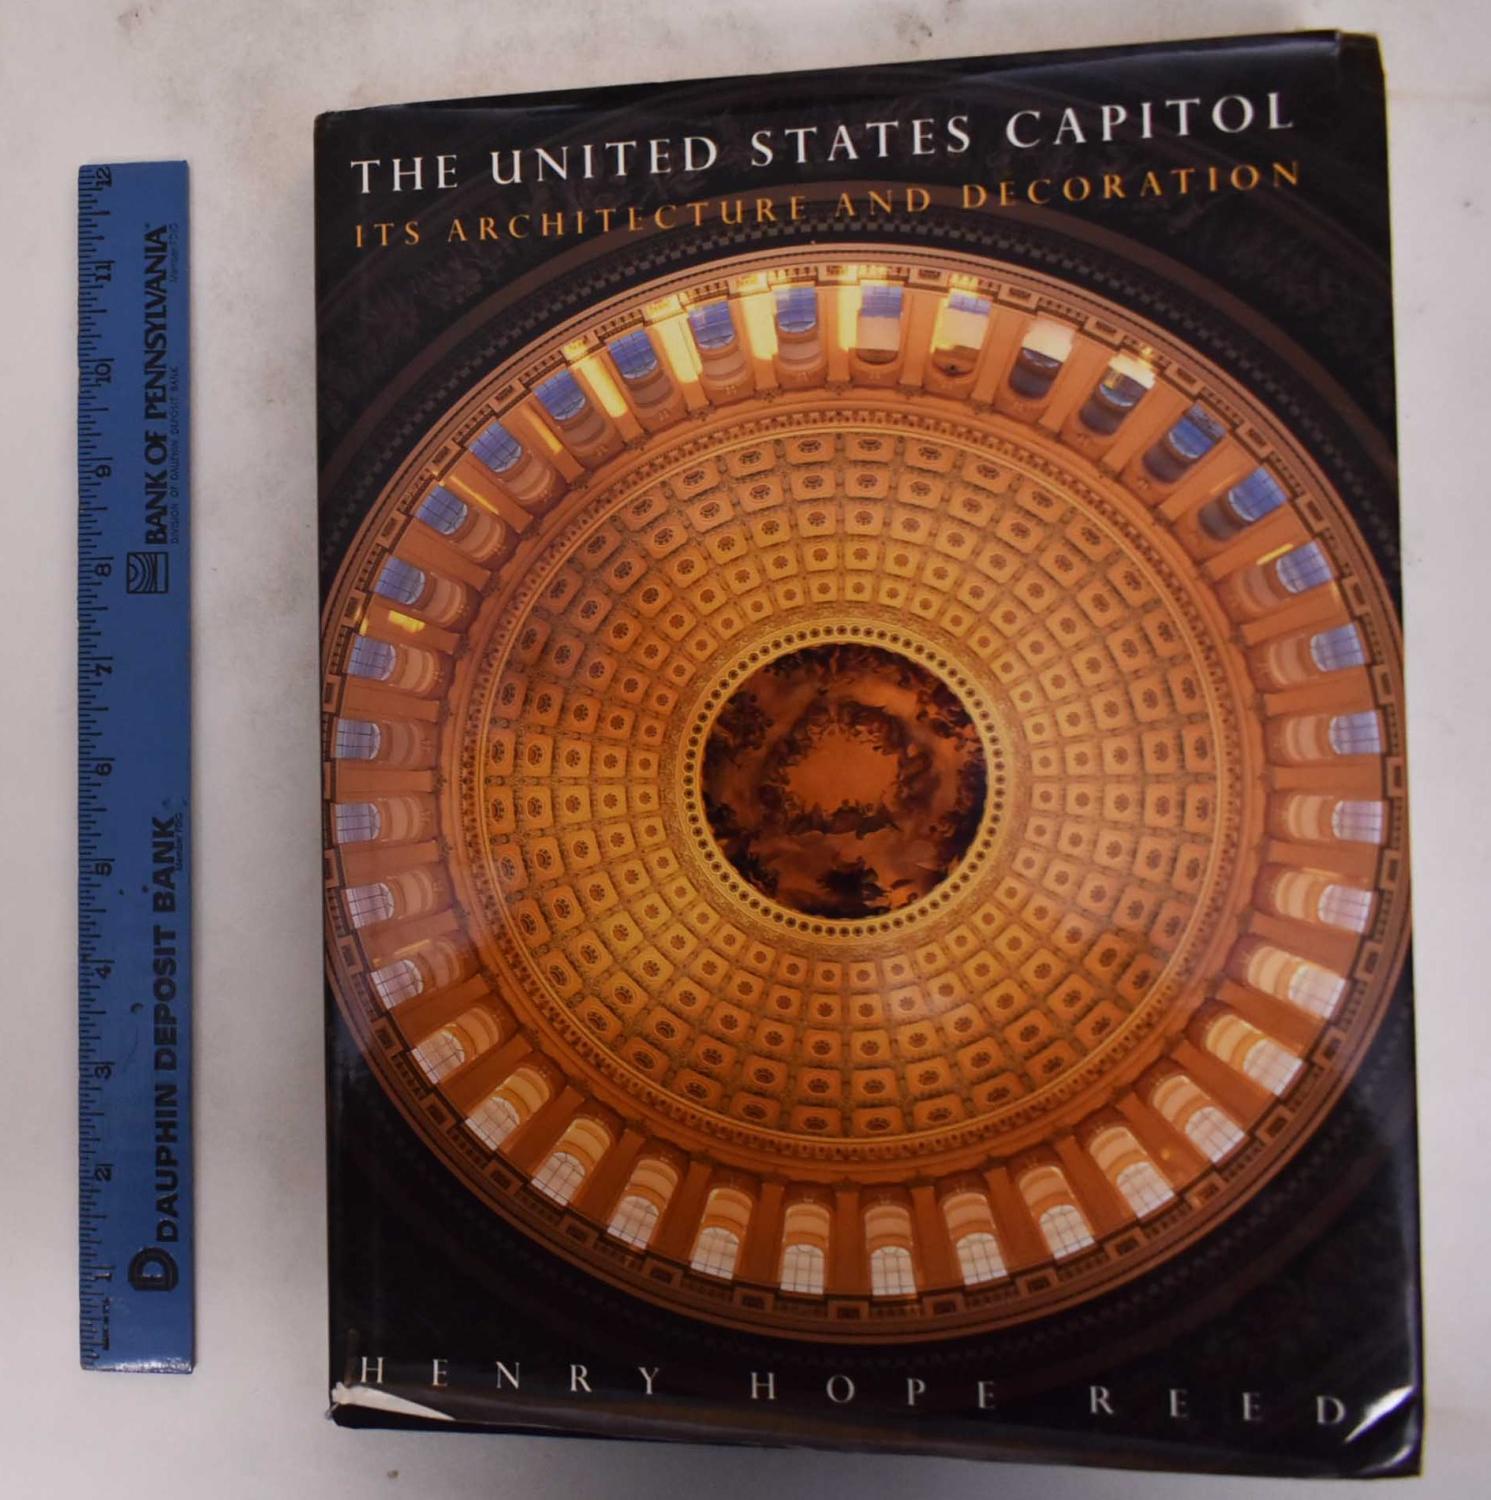 The United States Capitol: its Architecture and Decoration - Reed, Henry Hope and Anne Day